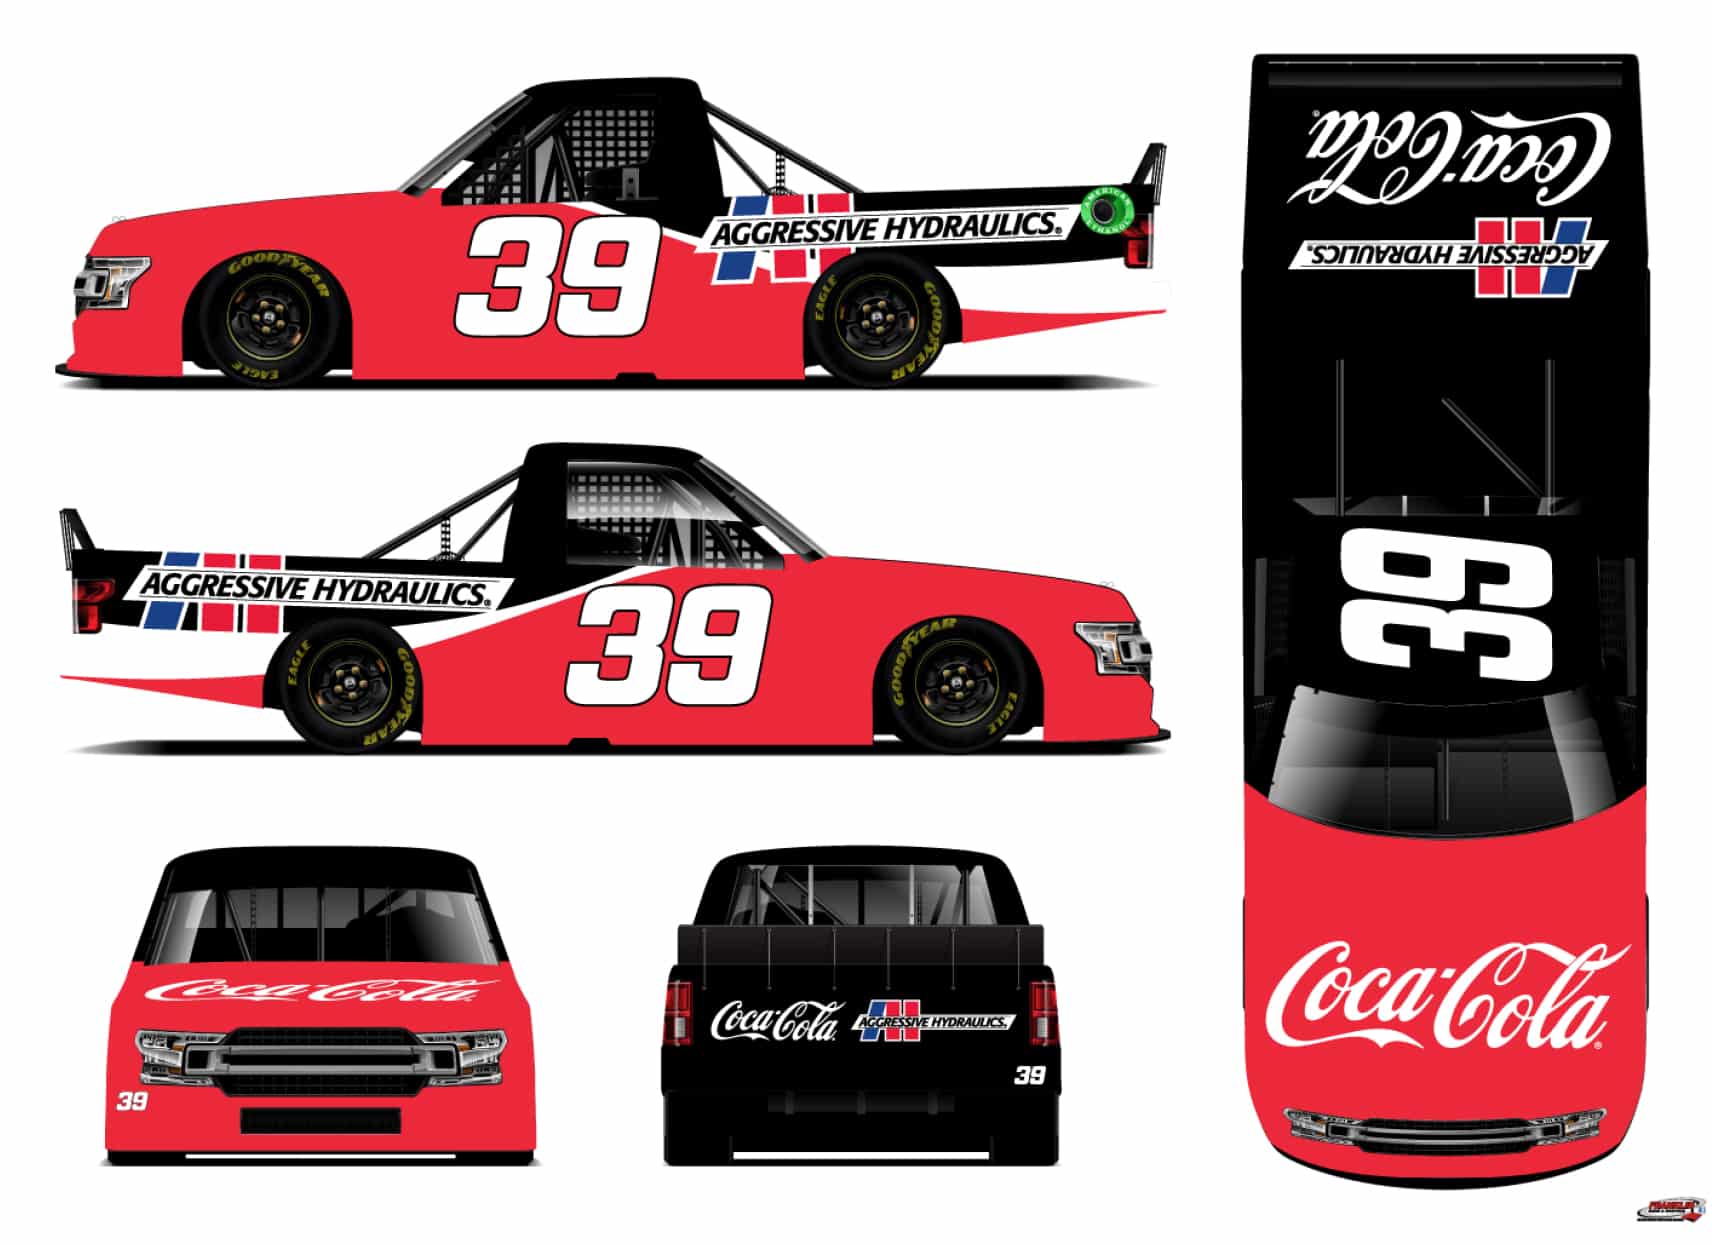 Aggressive Hydraulics DCC Racing to Make NASCAR Debut with Ryan Newman in Pintys Truck Race on Dirt at Bristol Motor Speedway Aggressive Hydraulics -